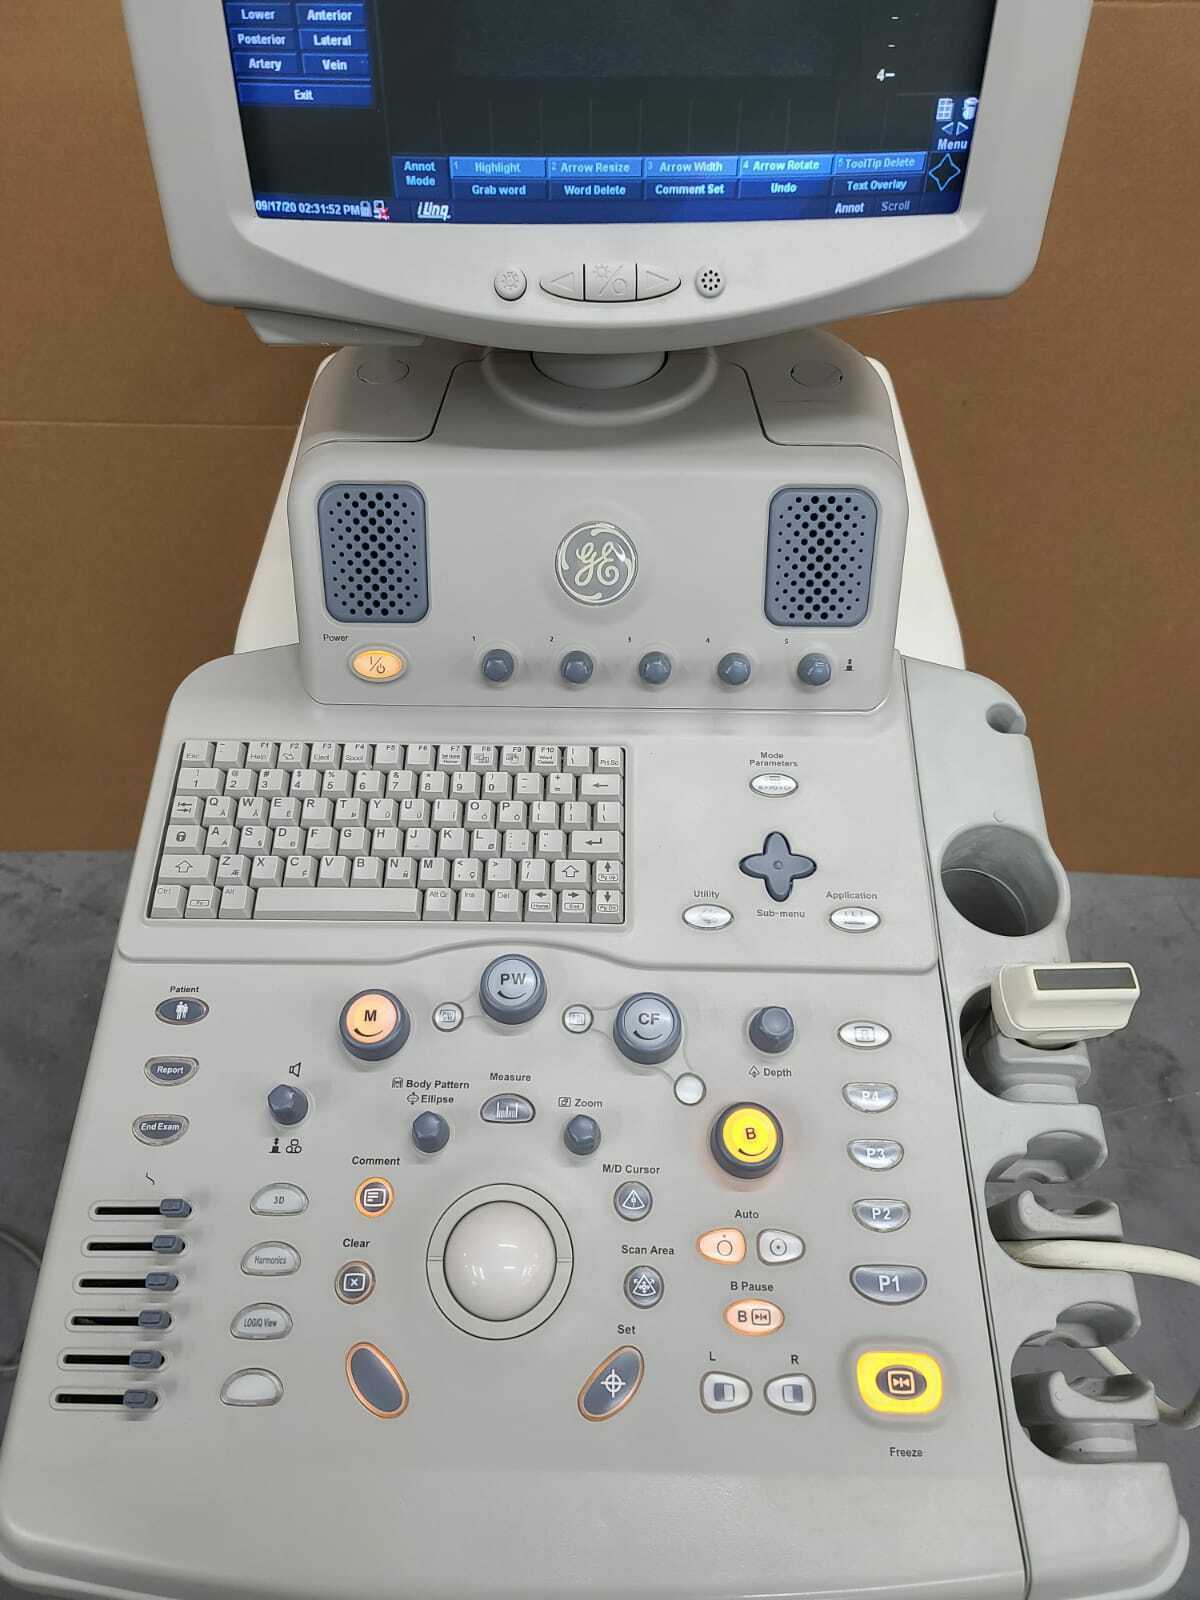 GE LOGIQ 3 EXPERT Ultrasound System with 739L Probe - FULLY TESTED DIAGNOSTIC ULTRASOUND MACHINES FOR SALE